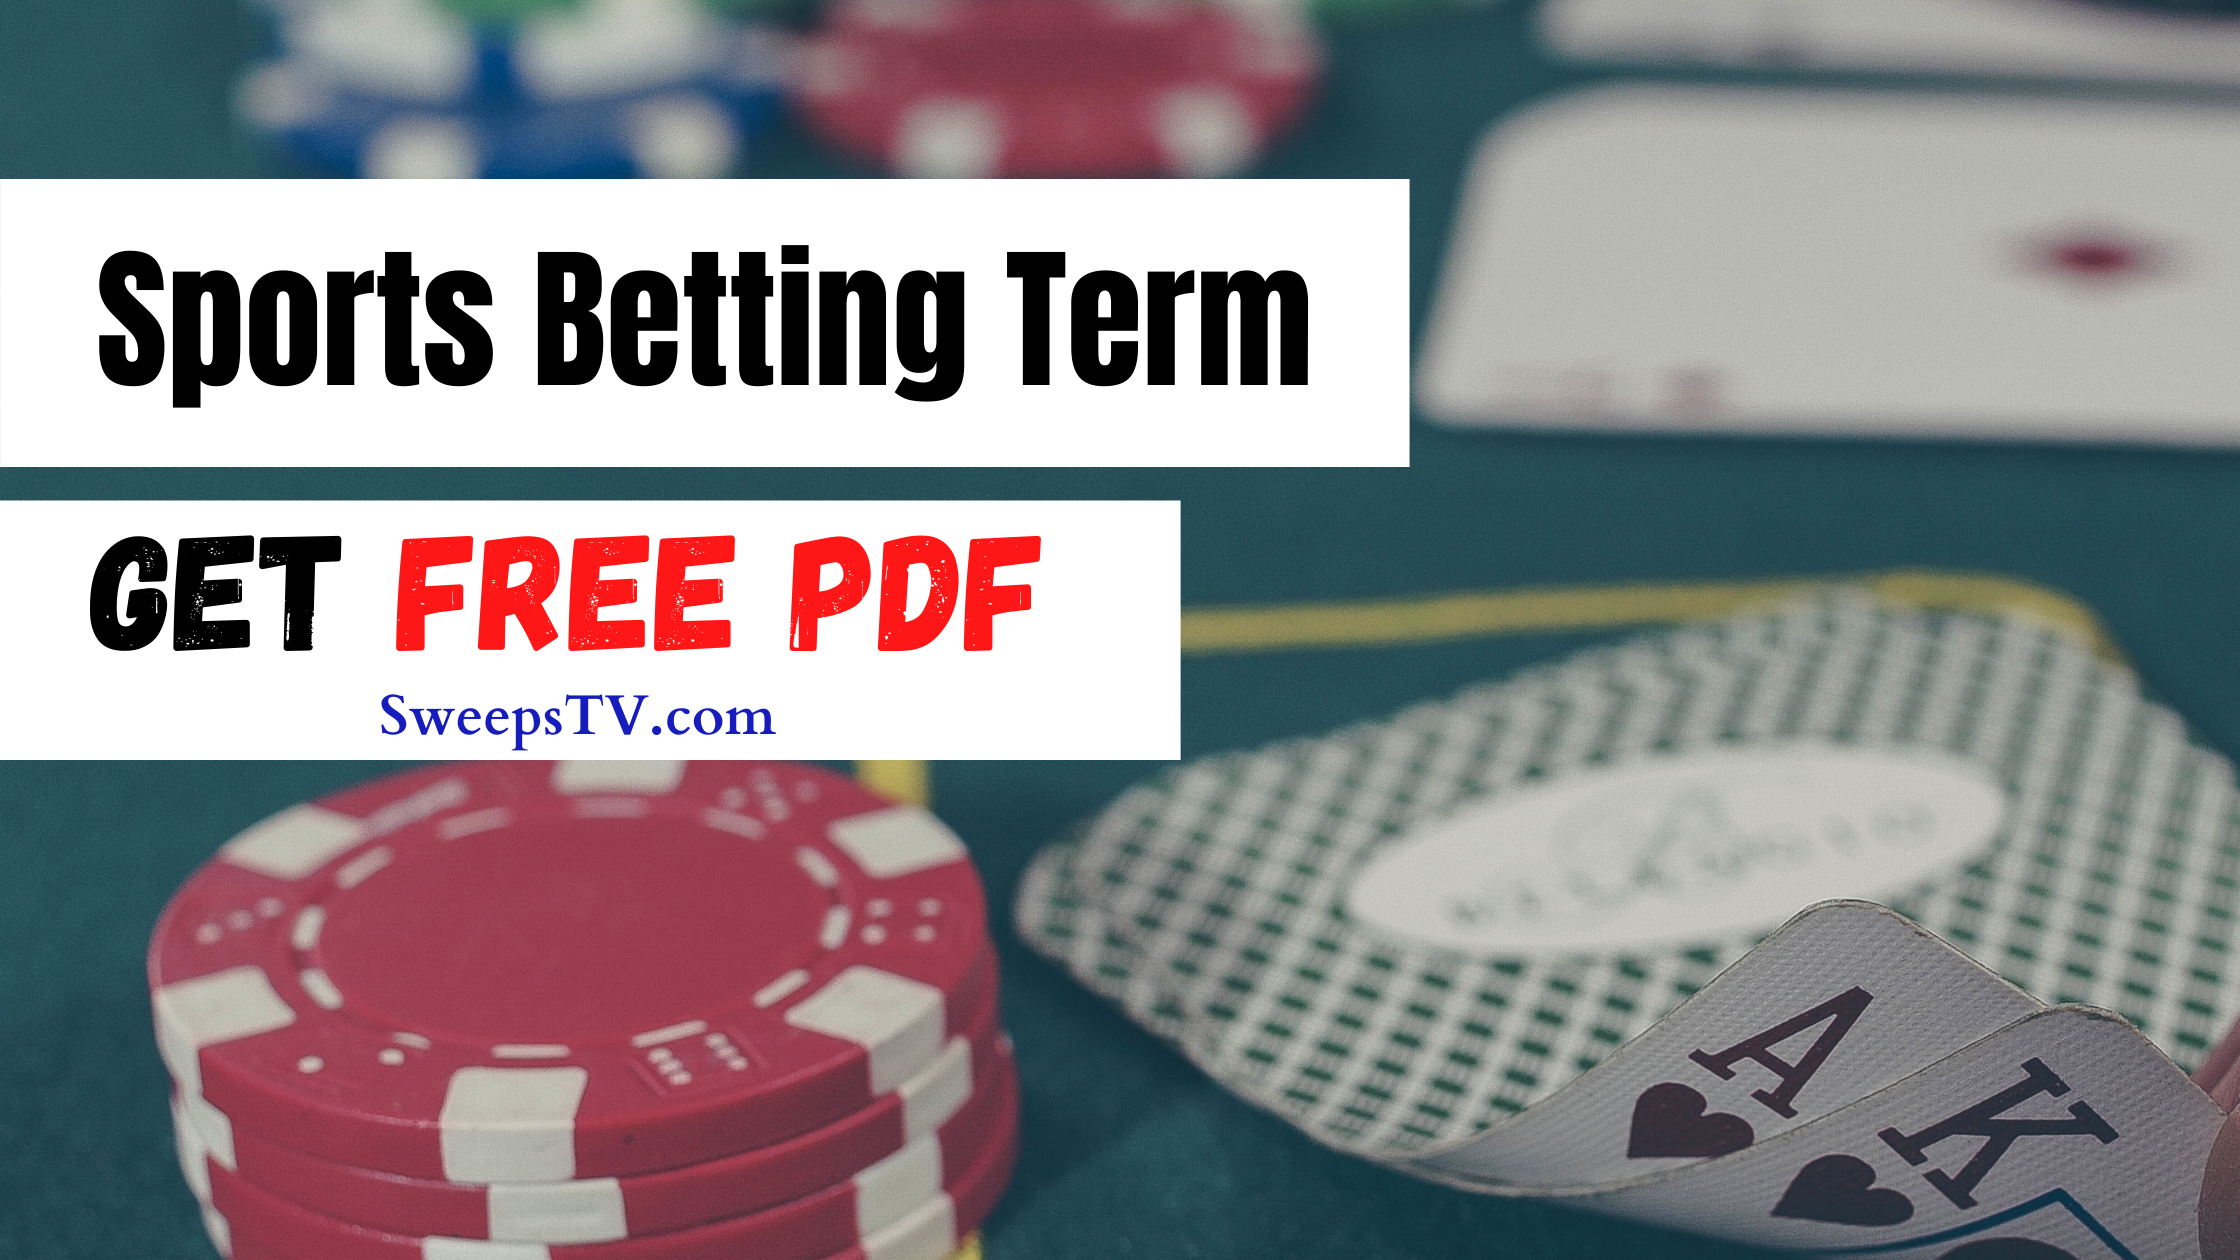 What Does PK Mean In Betting? Score! Get Free Sports Betting PDF